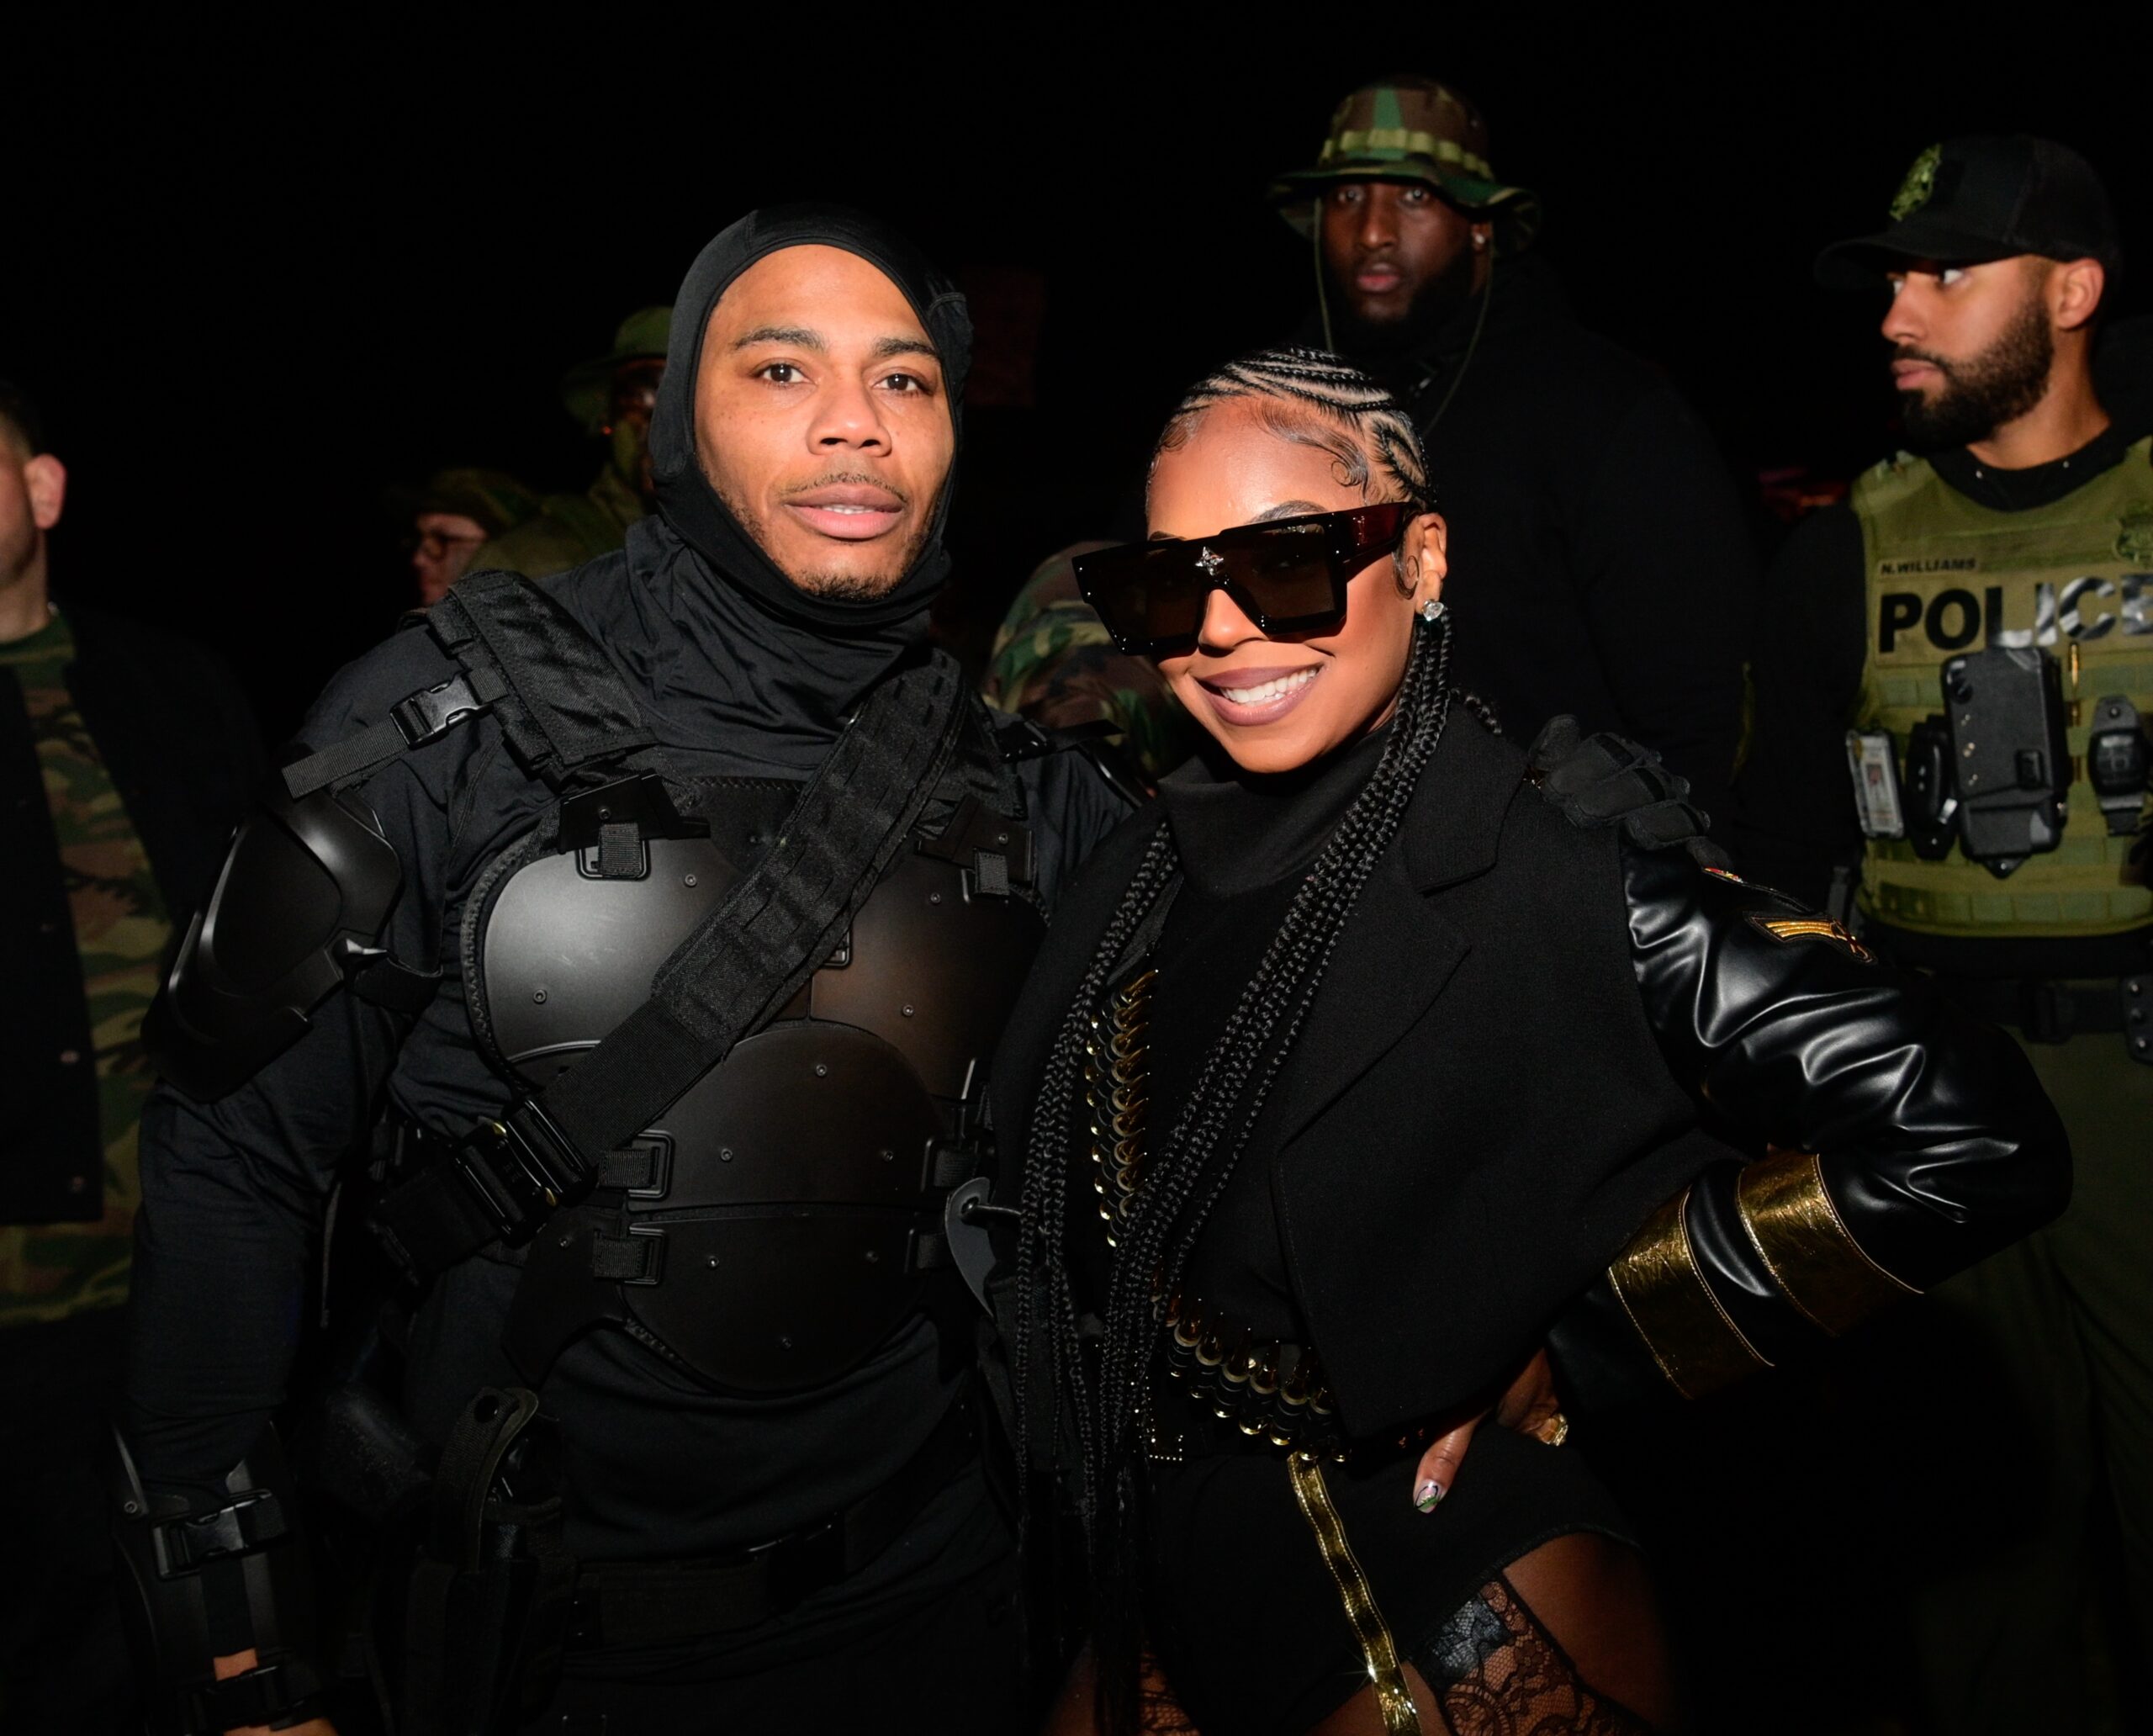 Nelly and Ashanti